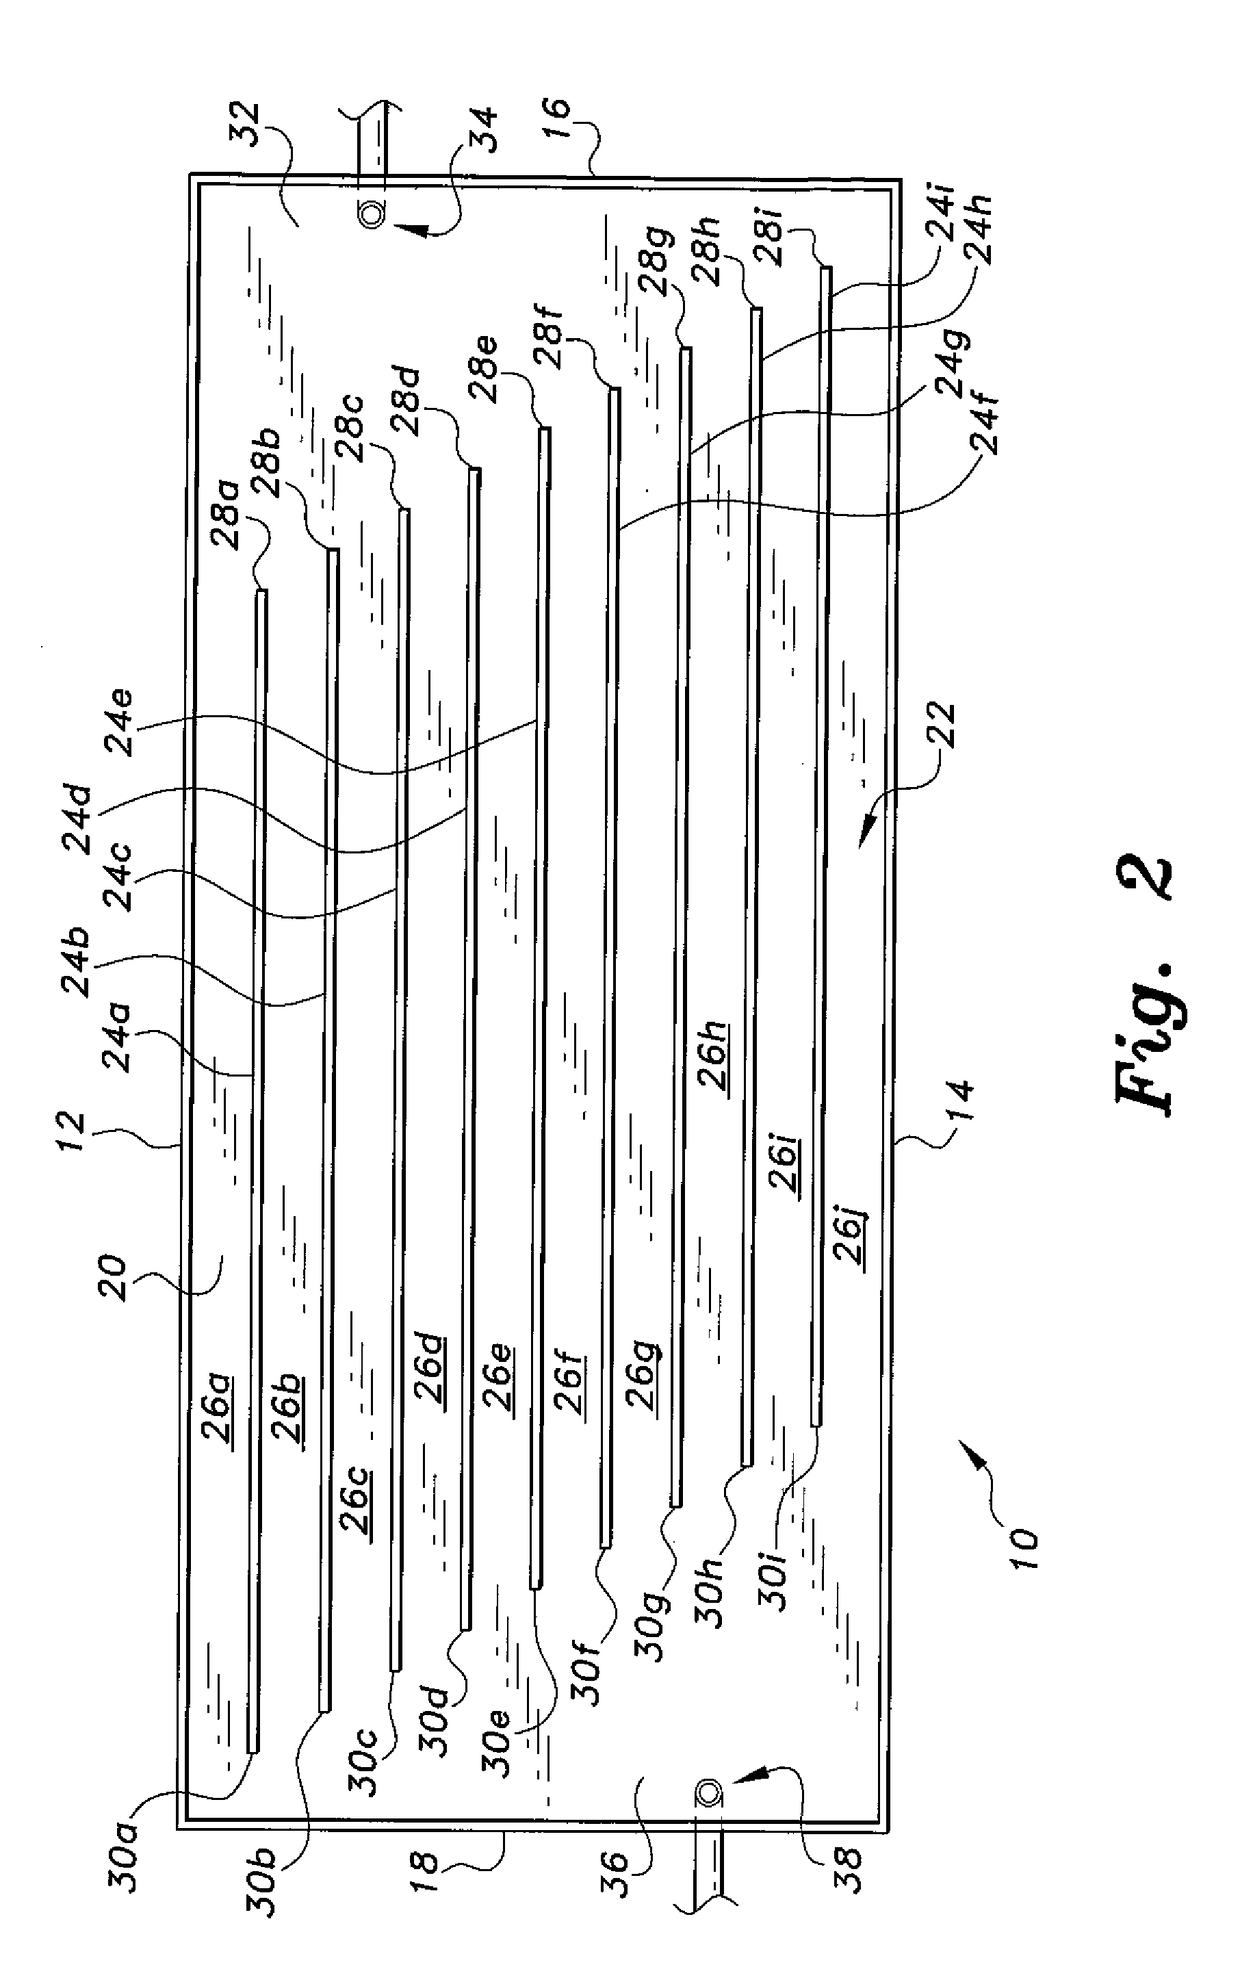 Heat exchanger for photovoltaic panels